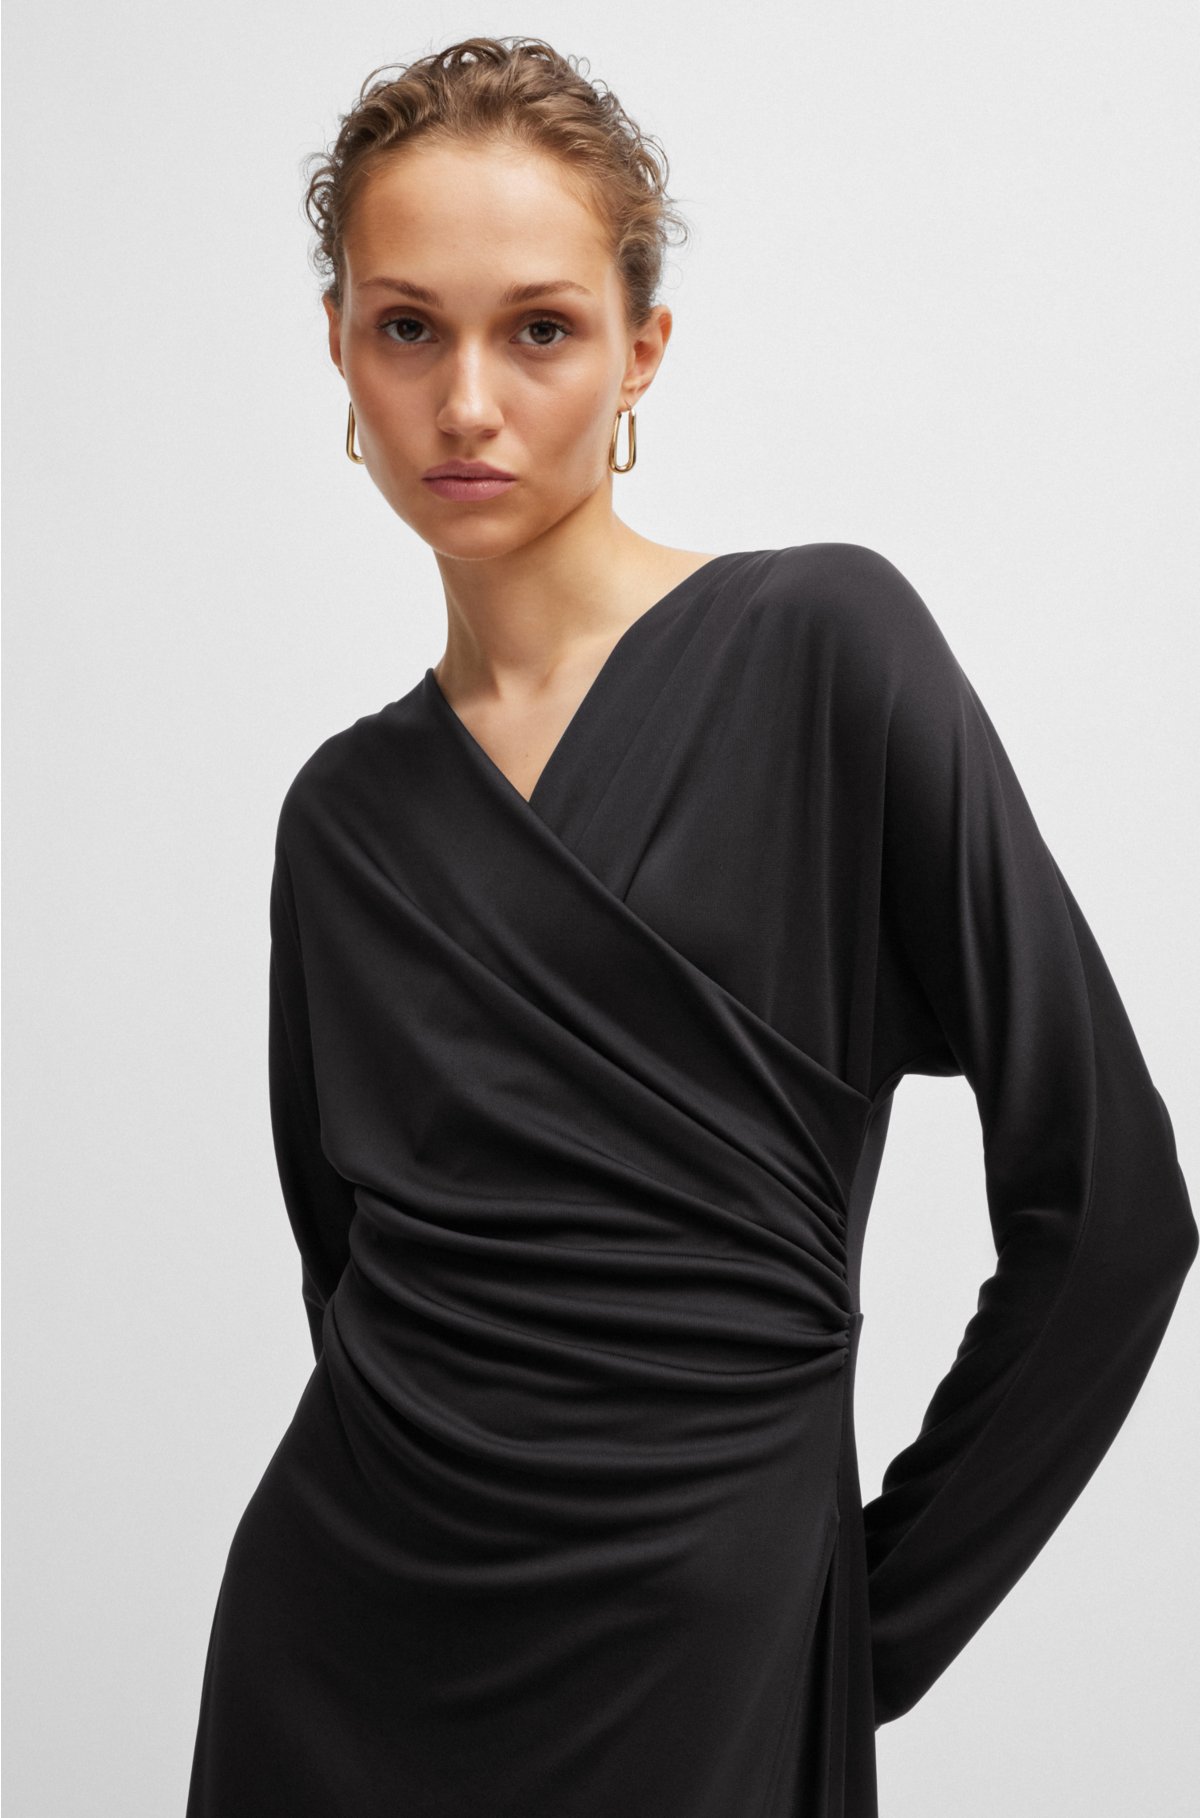 Long-sleeved dress with wrap front, Black